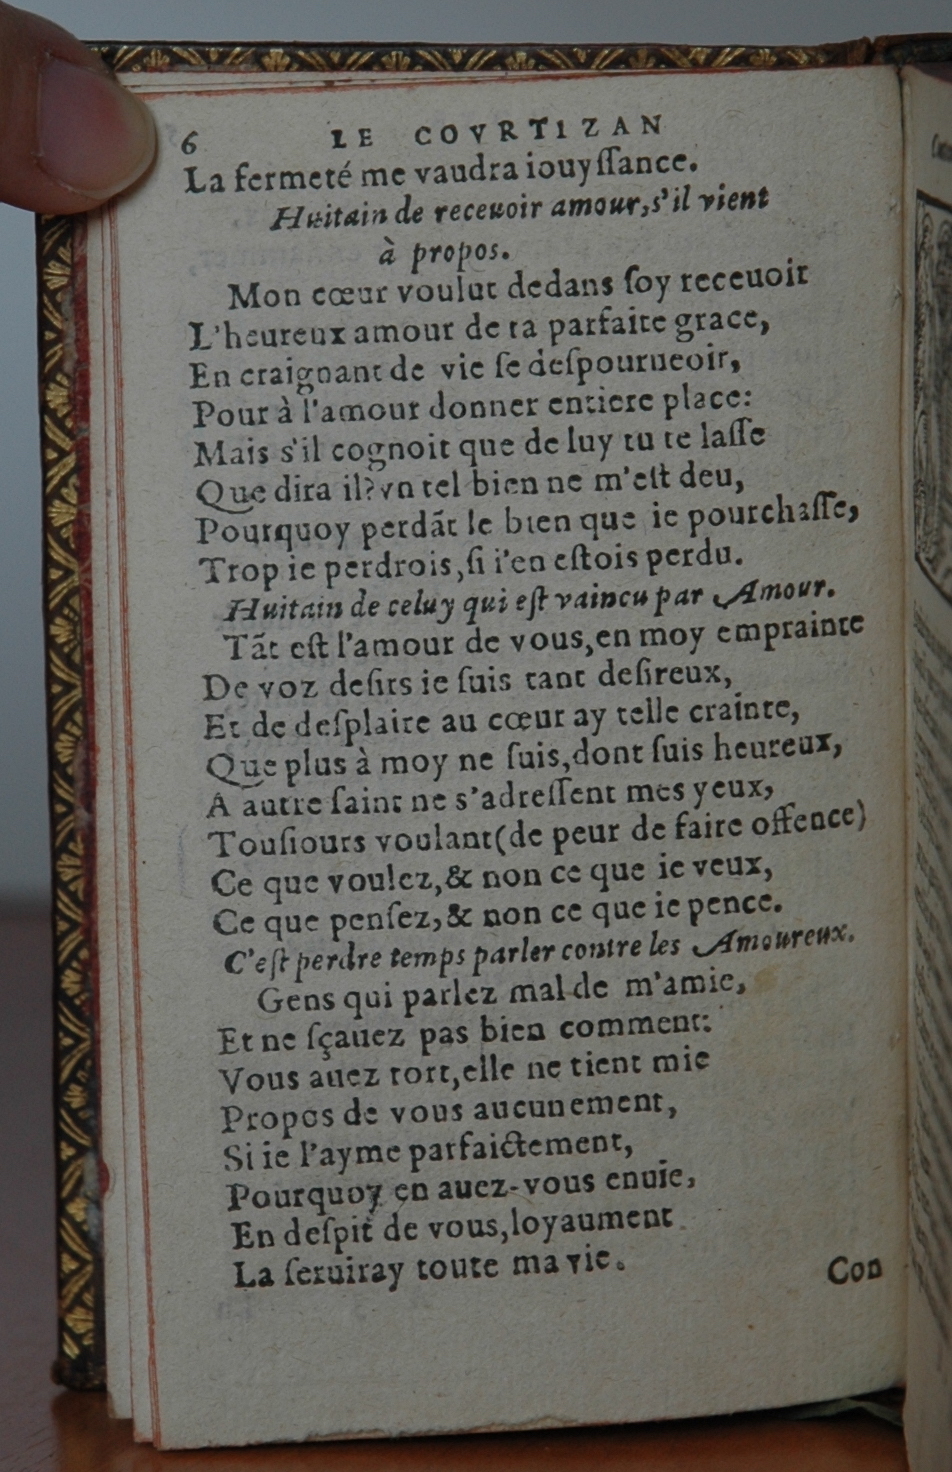 http://eman-archives.org/import/TJI/1582/[1582_Courtizanamoureux_Rigaud]_Page_006.jpg